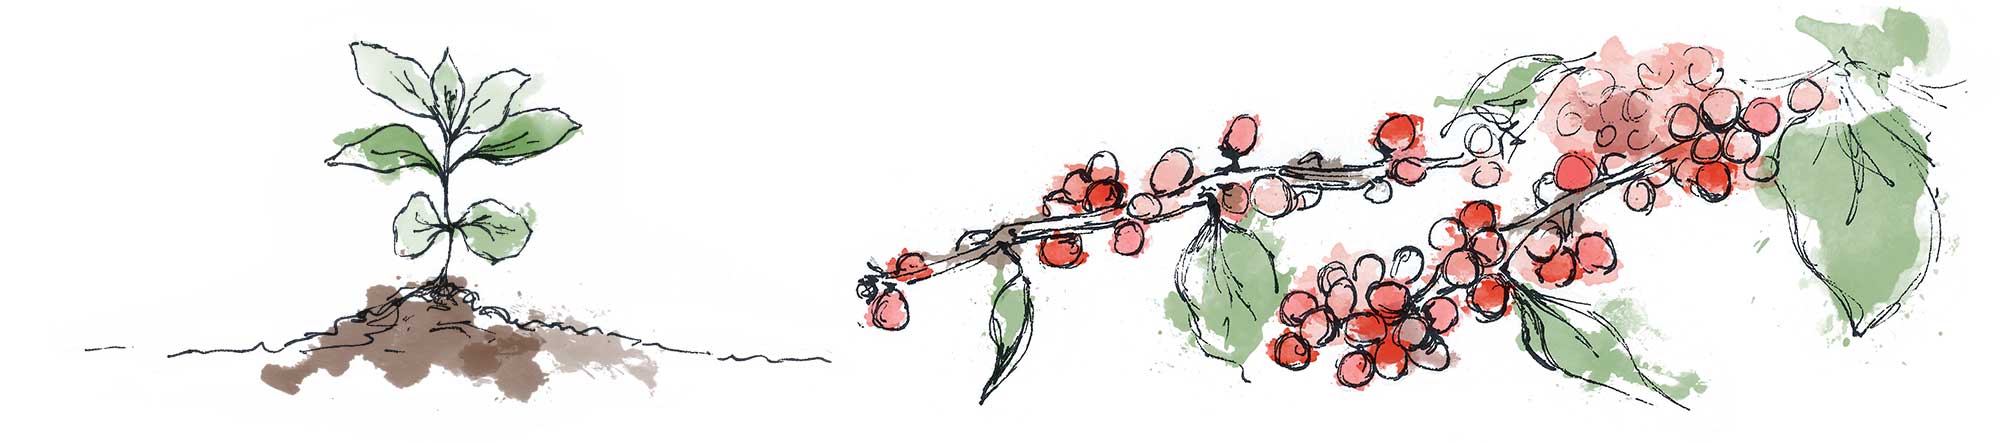 Illustration of coffee seedling and coffee berries